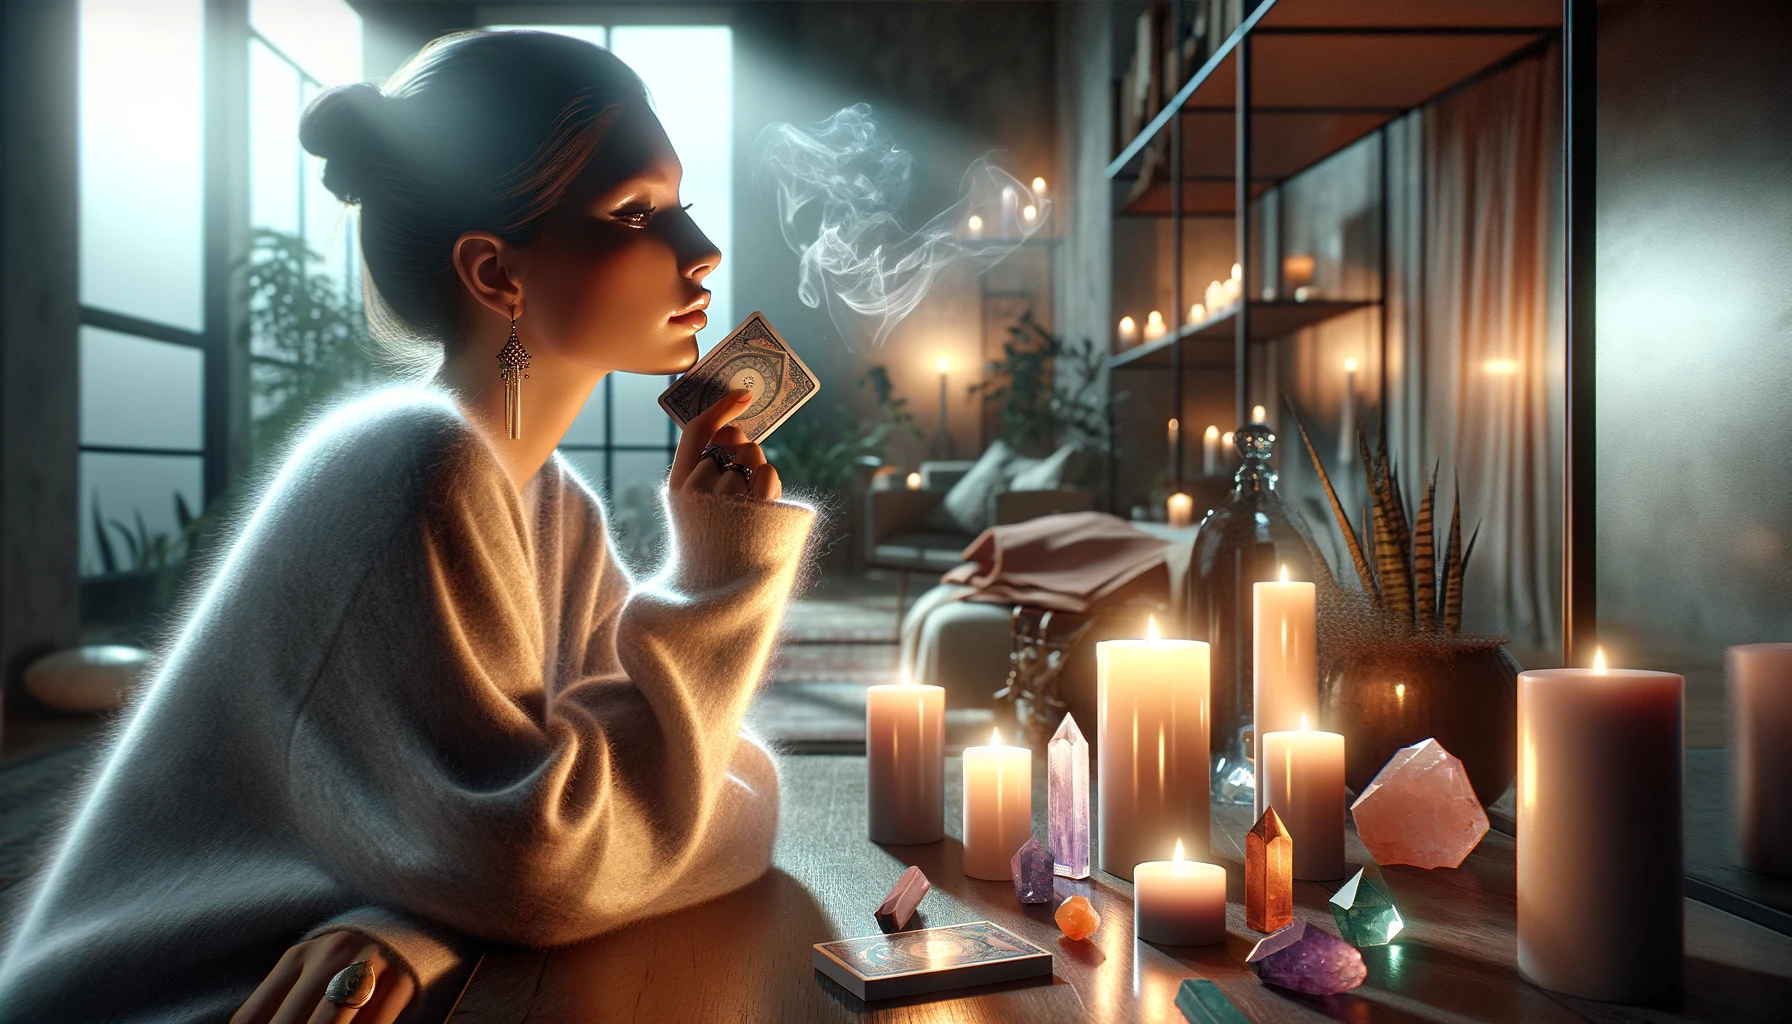 A photorealistic 169 image depicting a person in a modern serene bohemian home setting The person is introspectively holding a tarot card with their face gently illuminated by reflecti